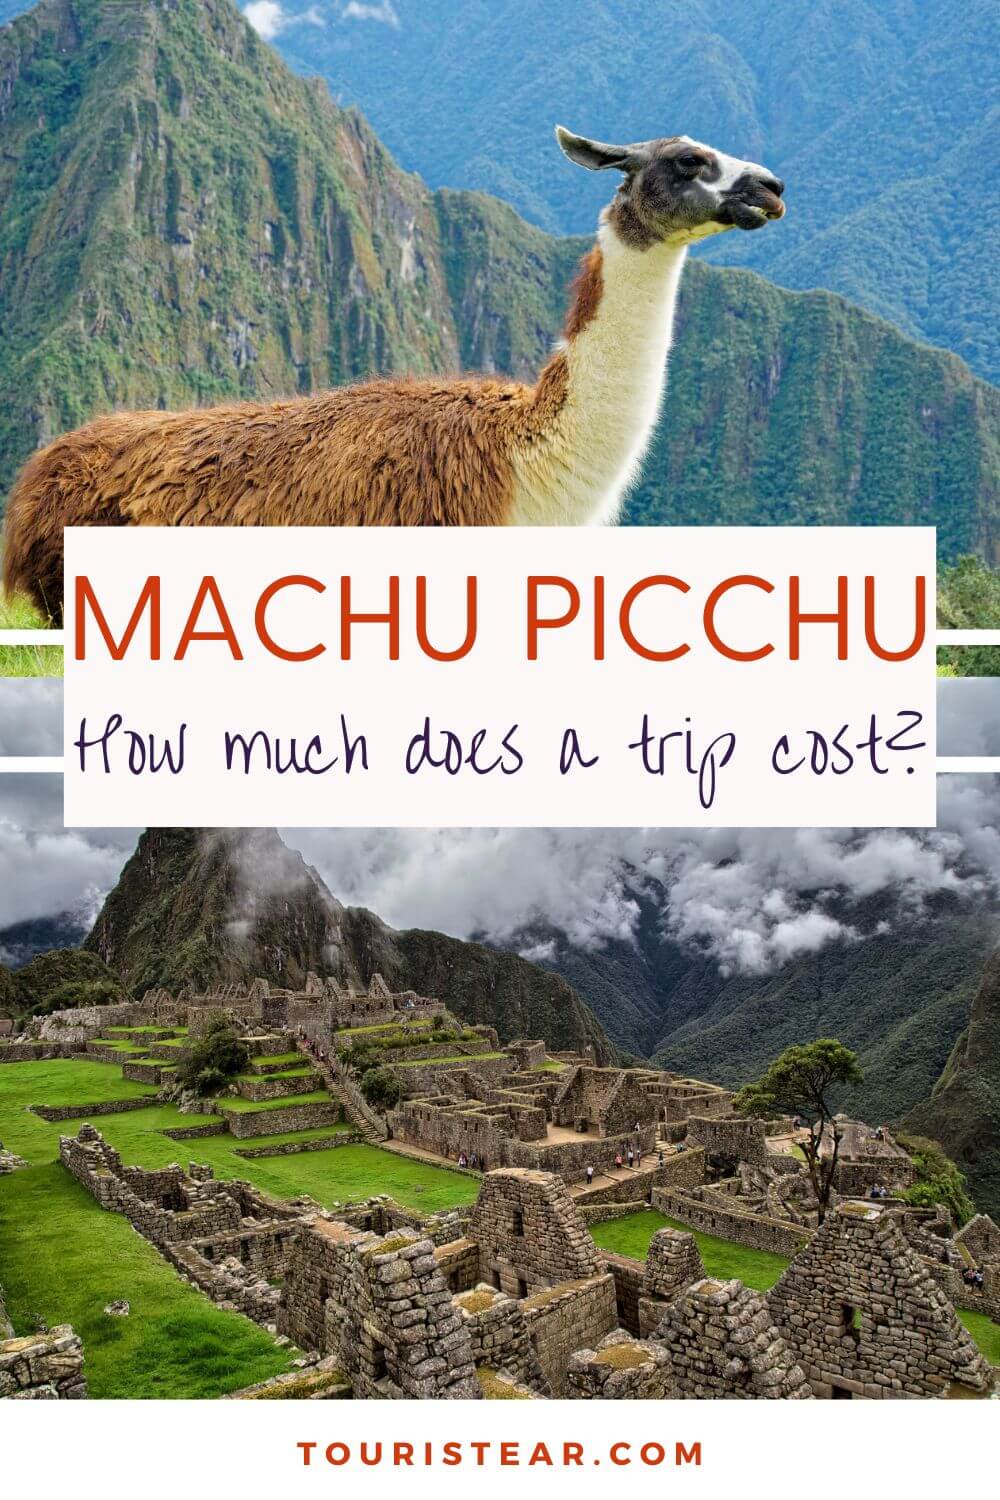 MACHU PICCHU HOW MUCH DOES IT COST